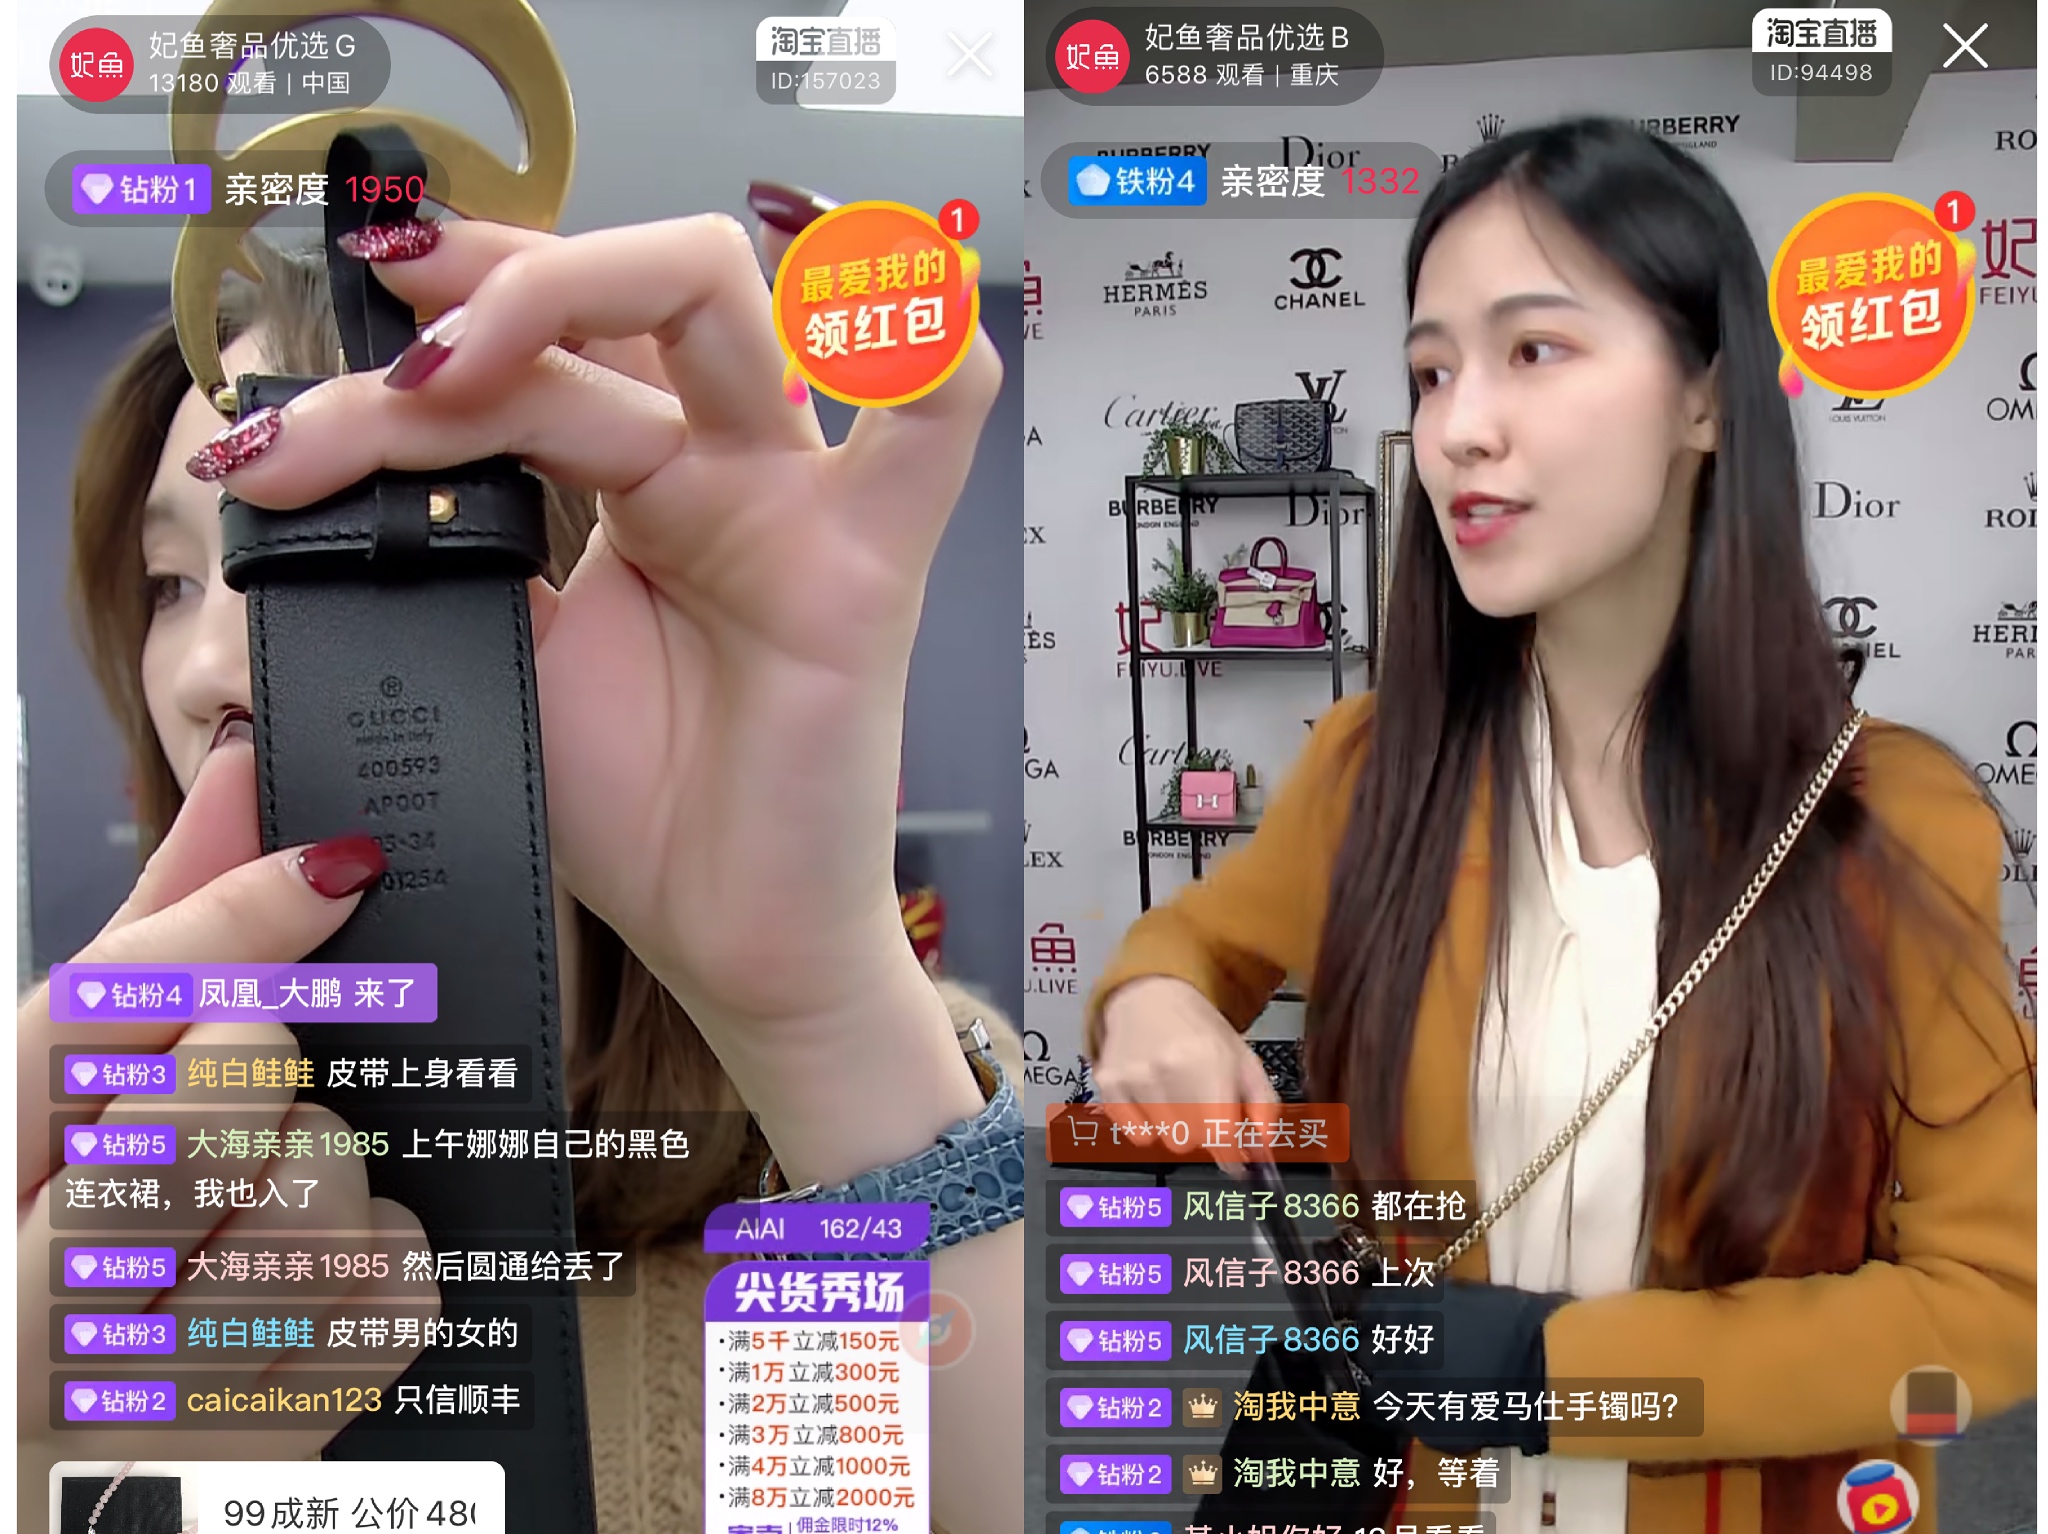 TECH PANO  China's online second-hand luxury sector boosted by